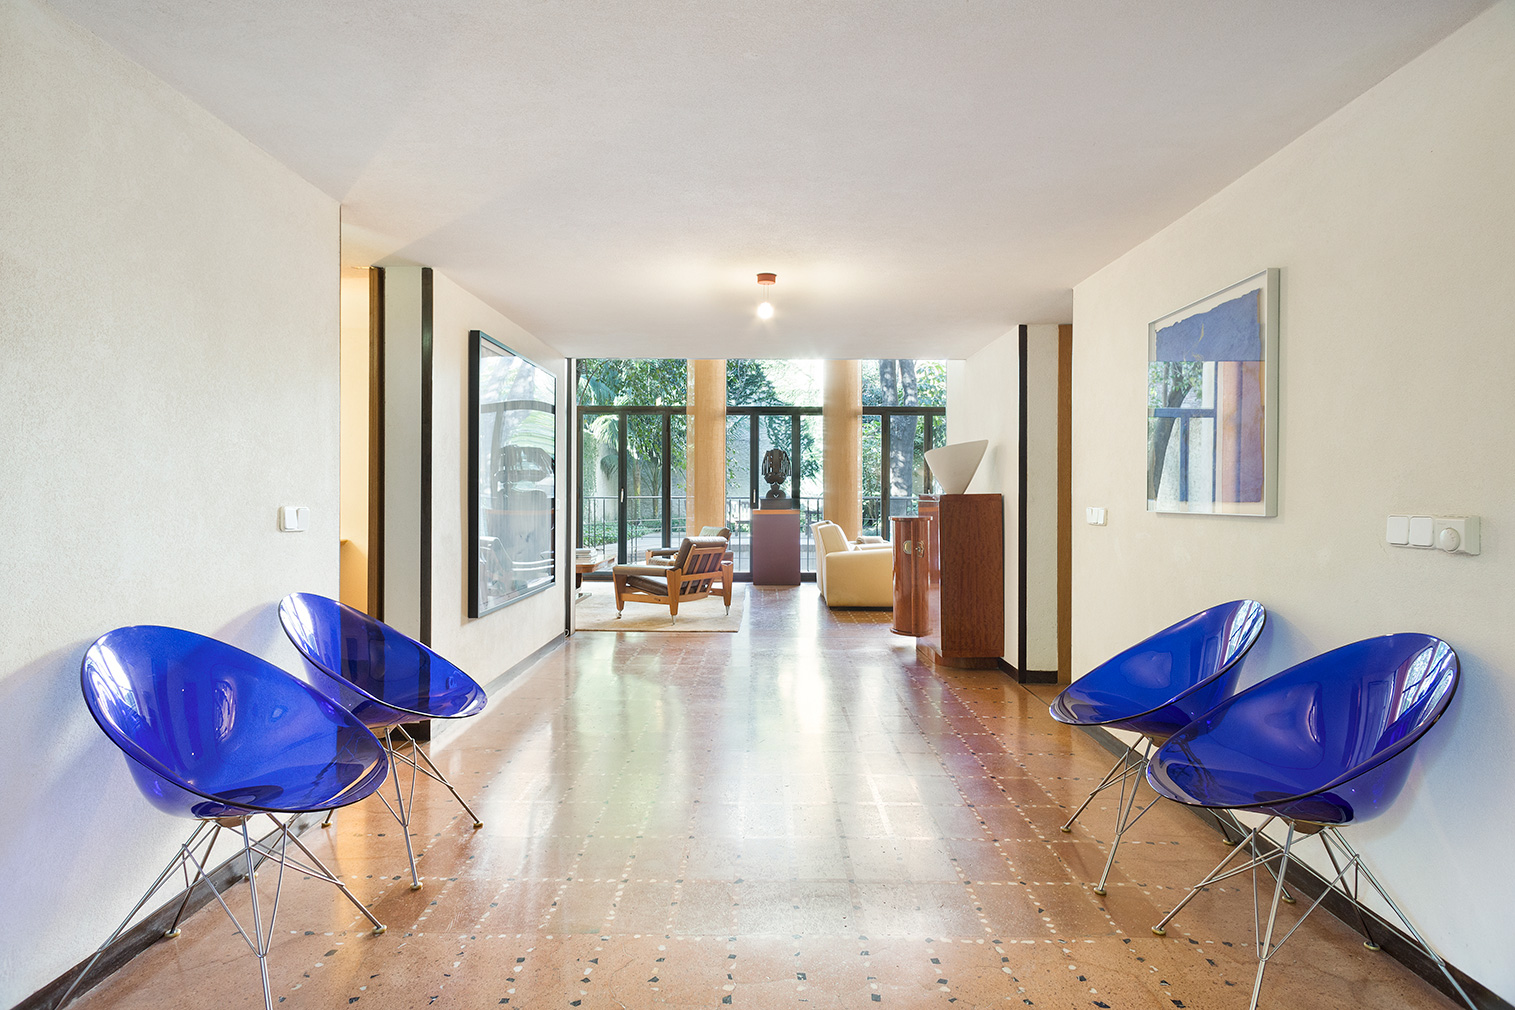 Property of the week: a Barcelona townhouse revived by Tobia Scarpa